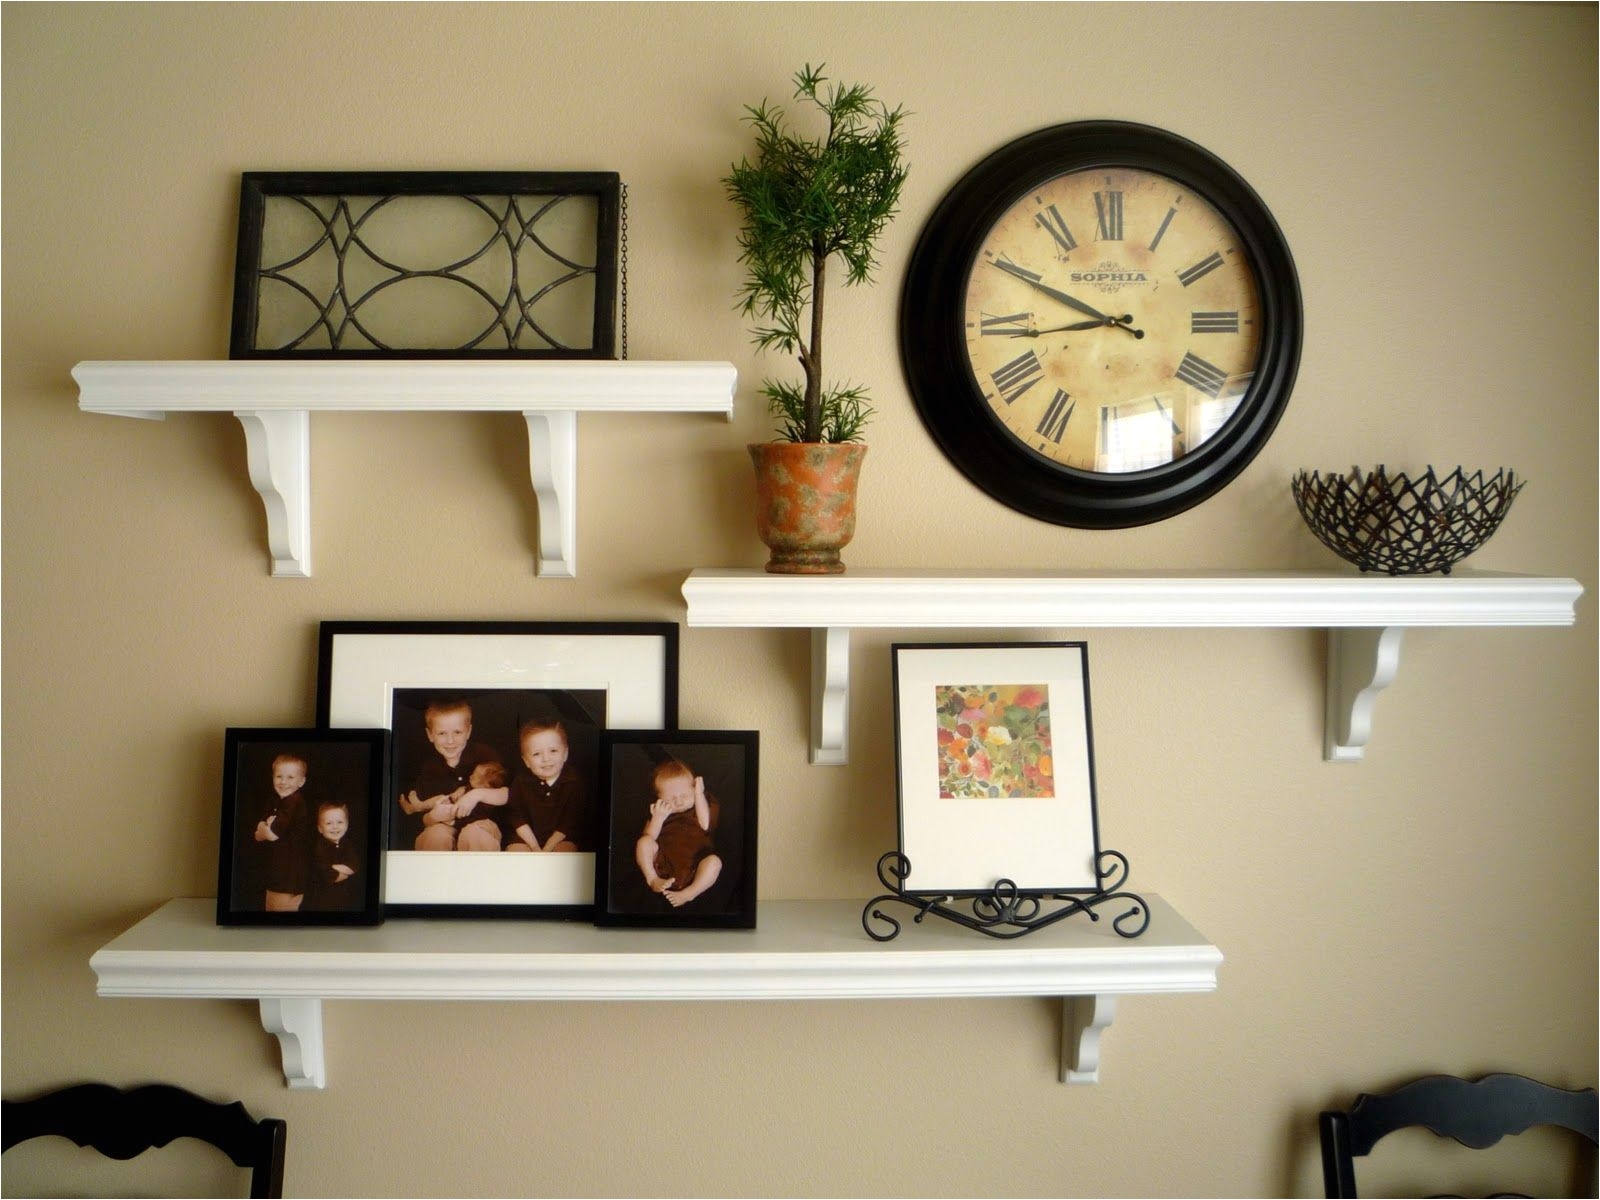 picture and shelves on wall to her